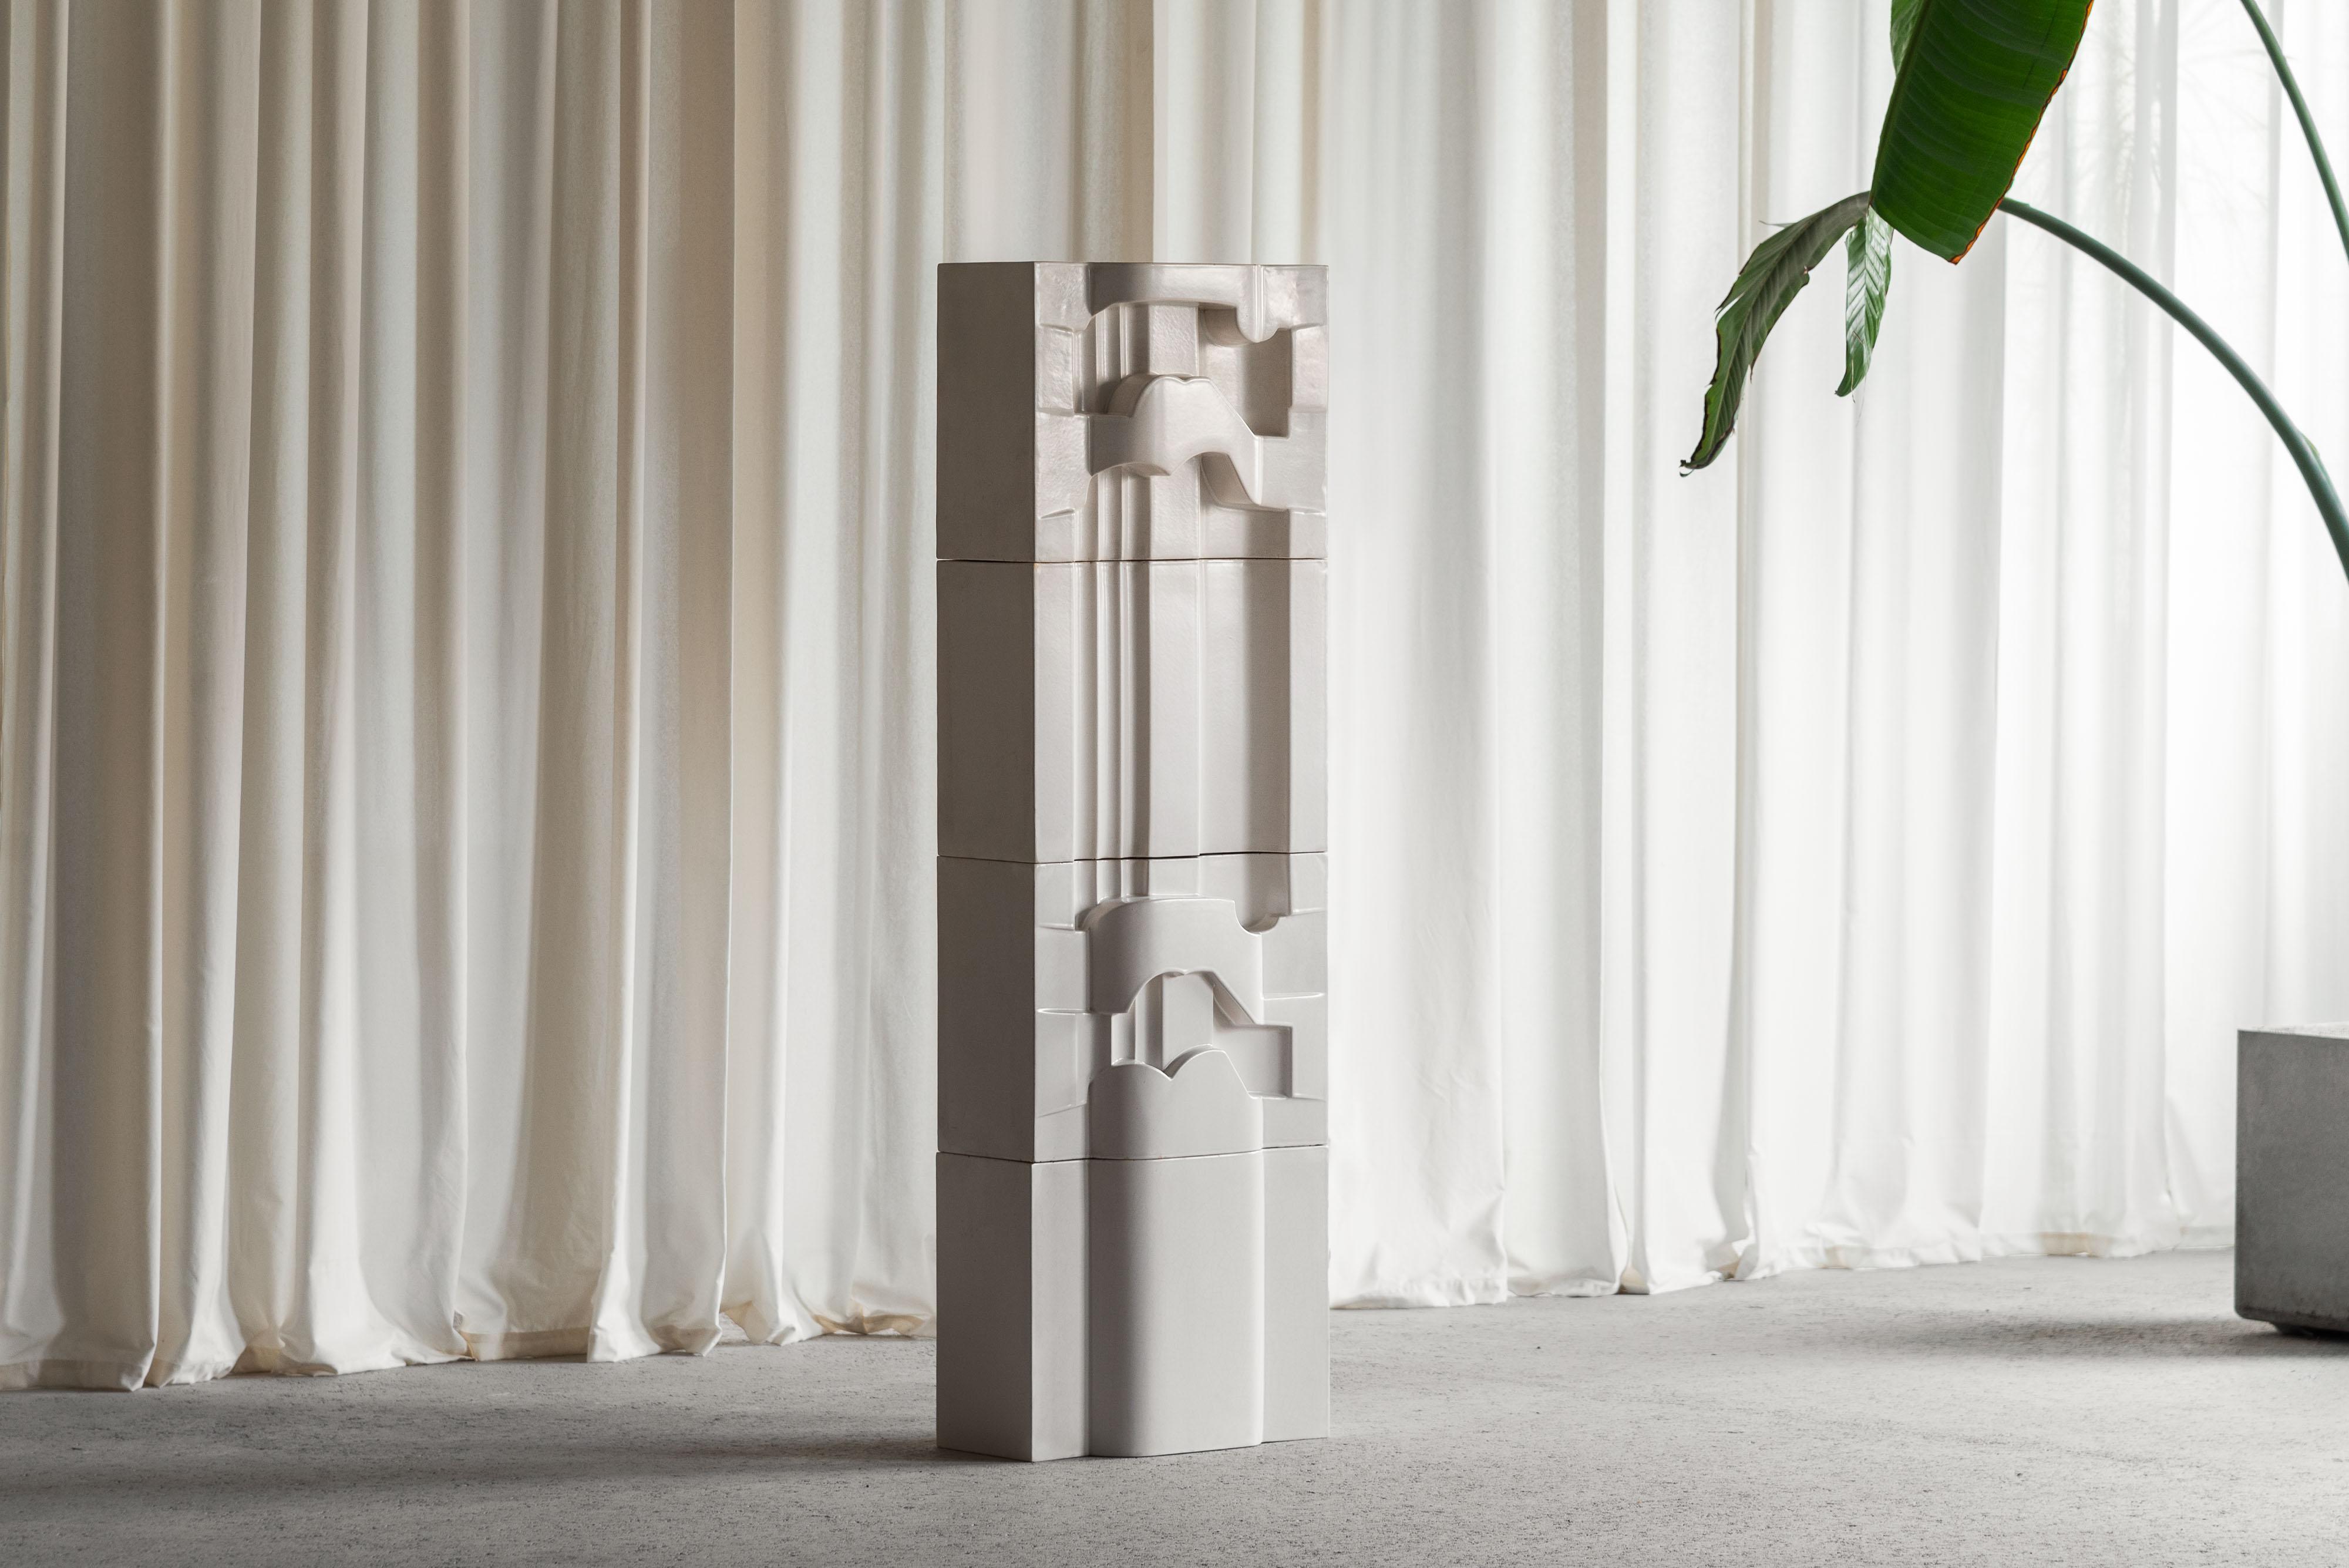 Beautiful modular sculpture made by Nino Caruso in Italy in 1974. This sculpture is made of cream white glazed ceramic. It has four different shapes stacked as a puzzle together, creating a cool architectural look. The sculpture has a nice off-white